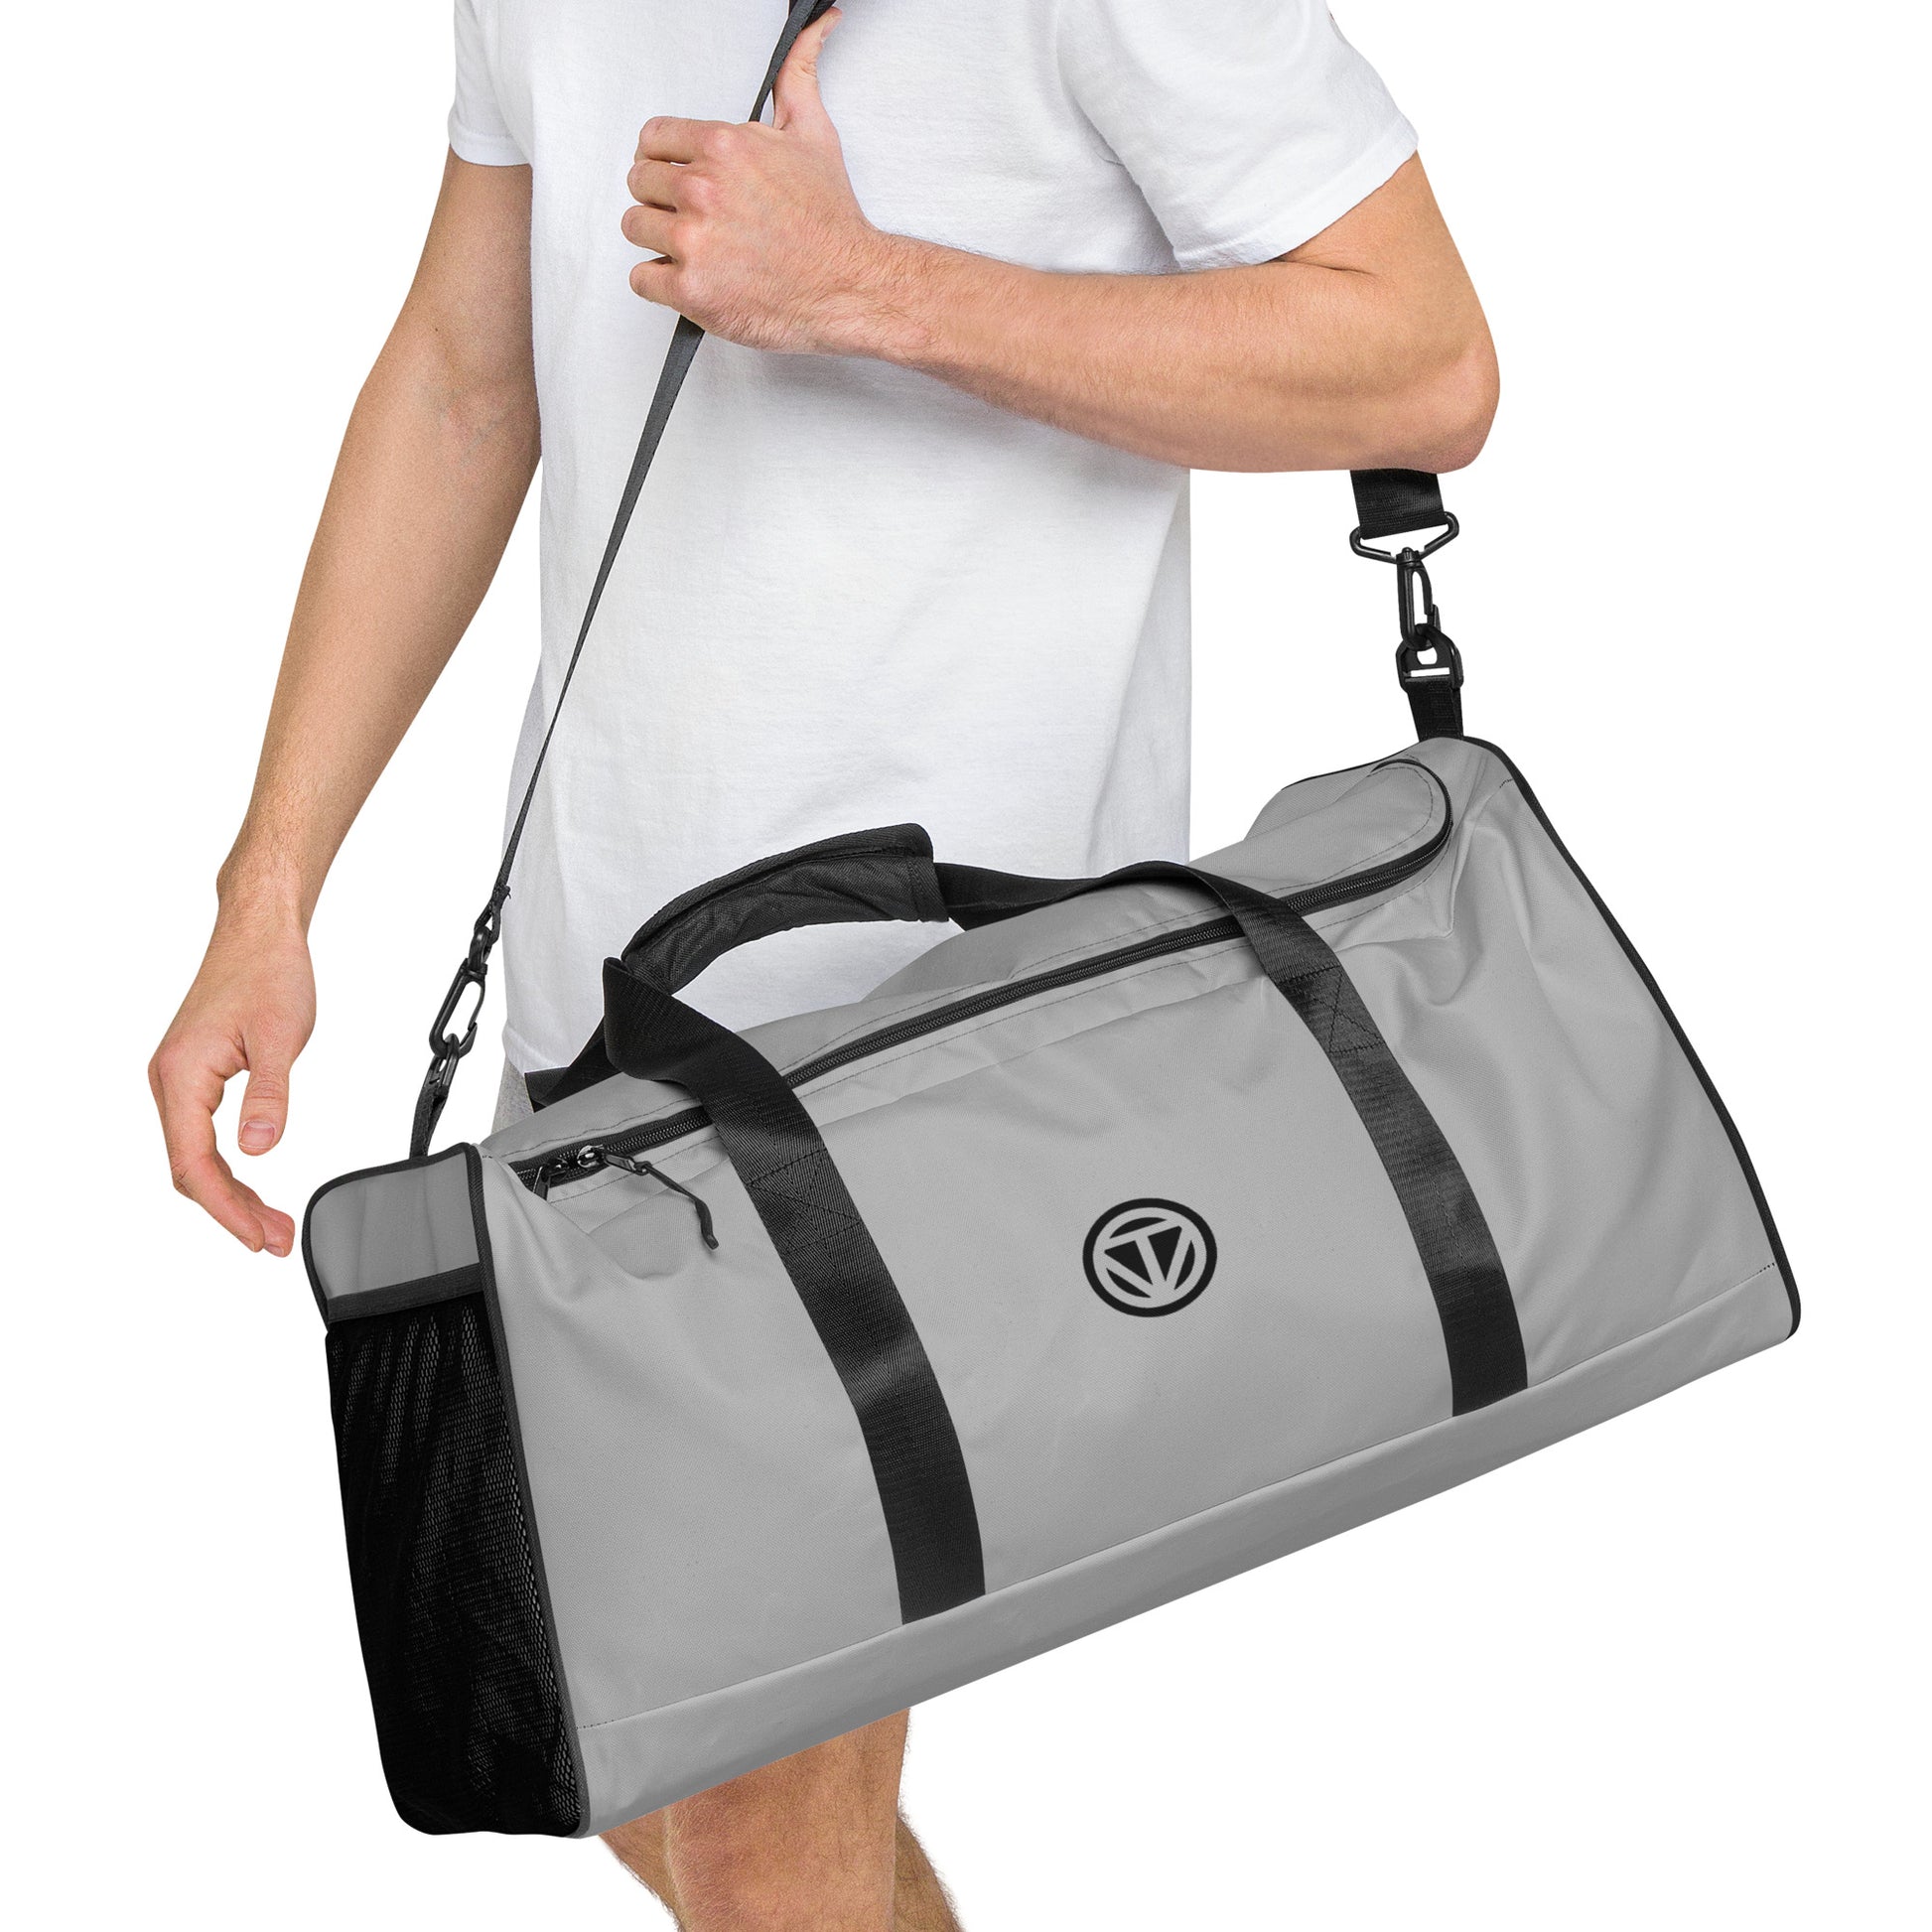 TIME OF VIBES - Travel Bag 23 (Silver) - €99.00